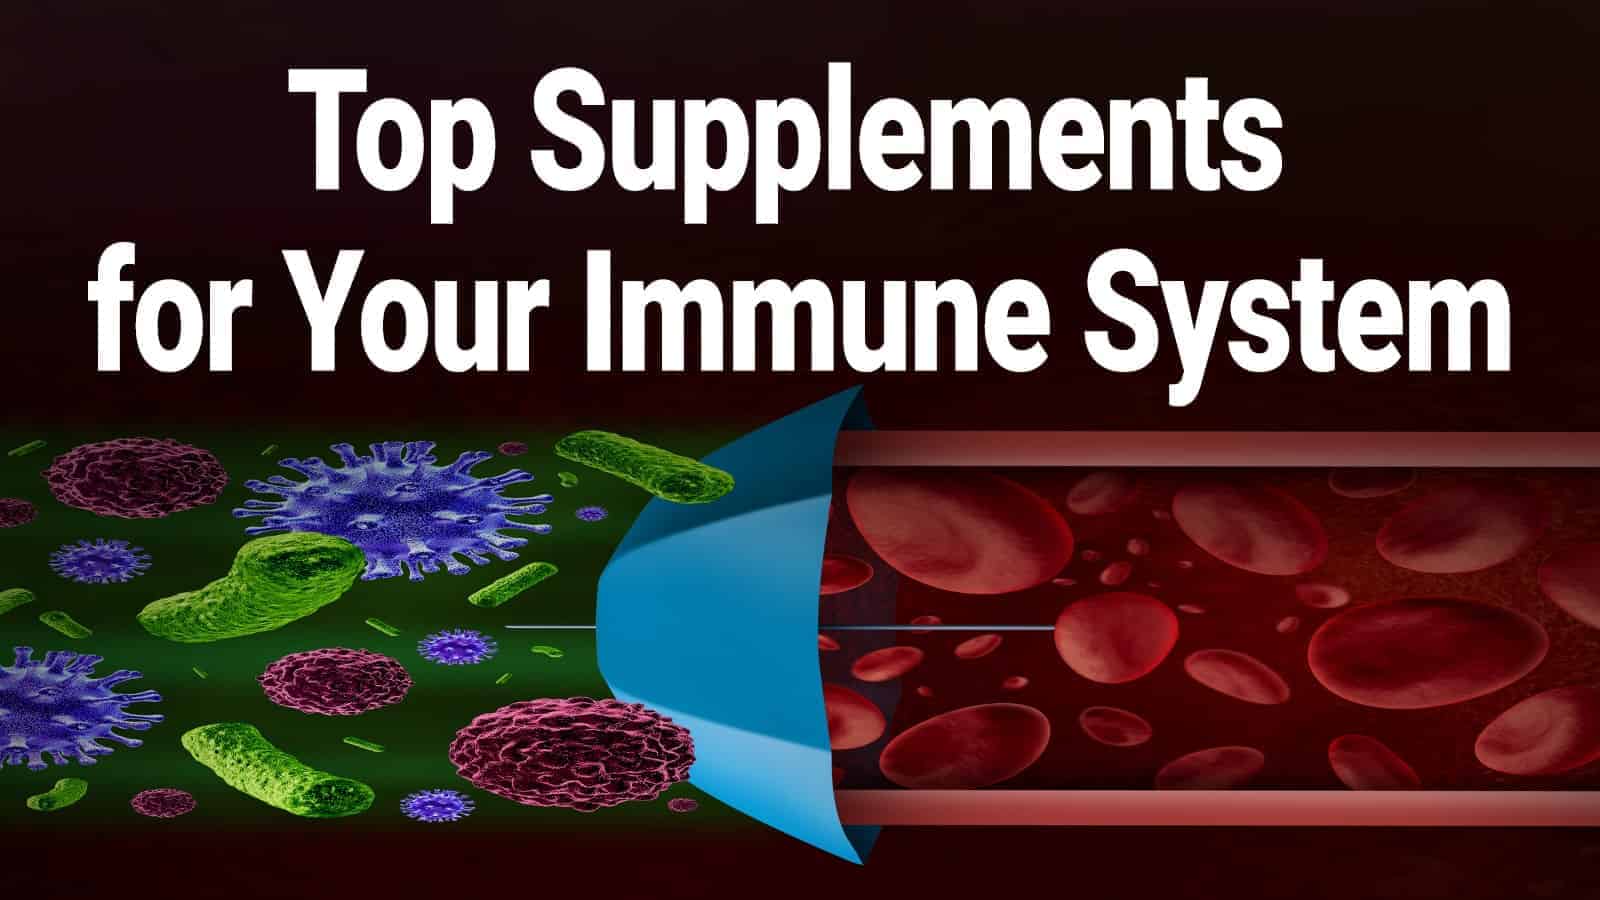 13 Top Supplements For Your Immune System